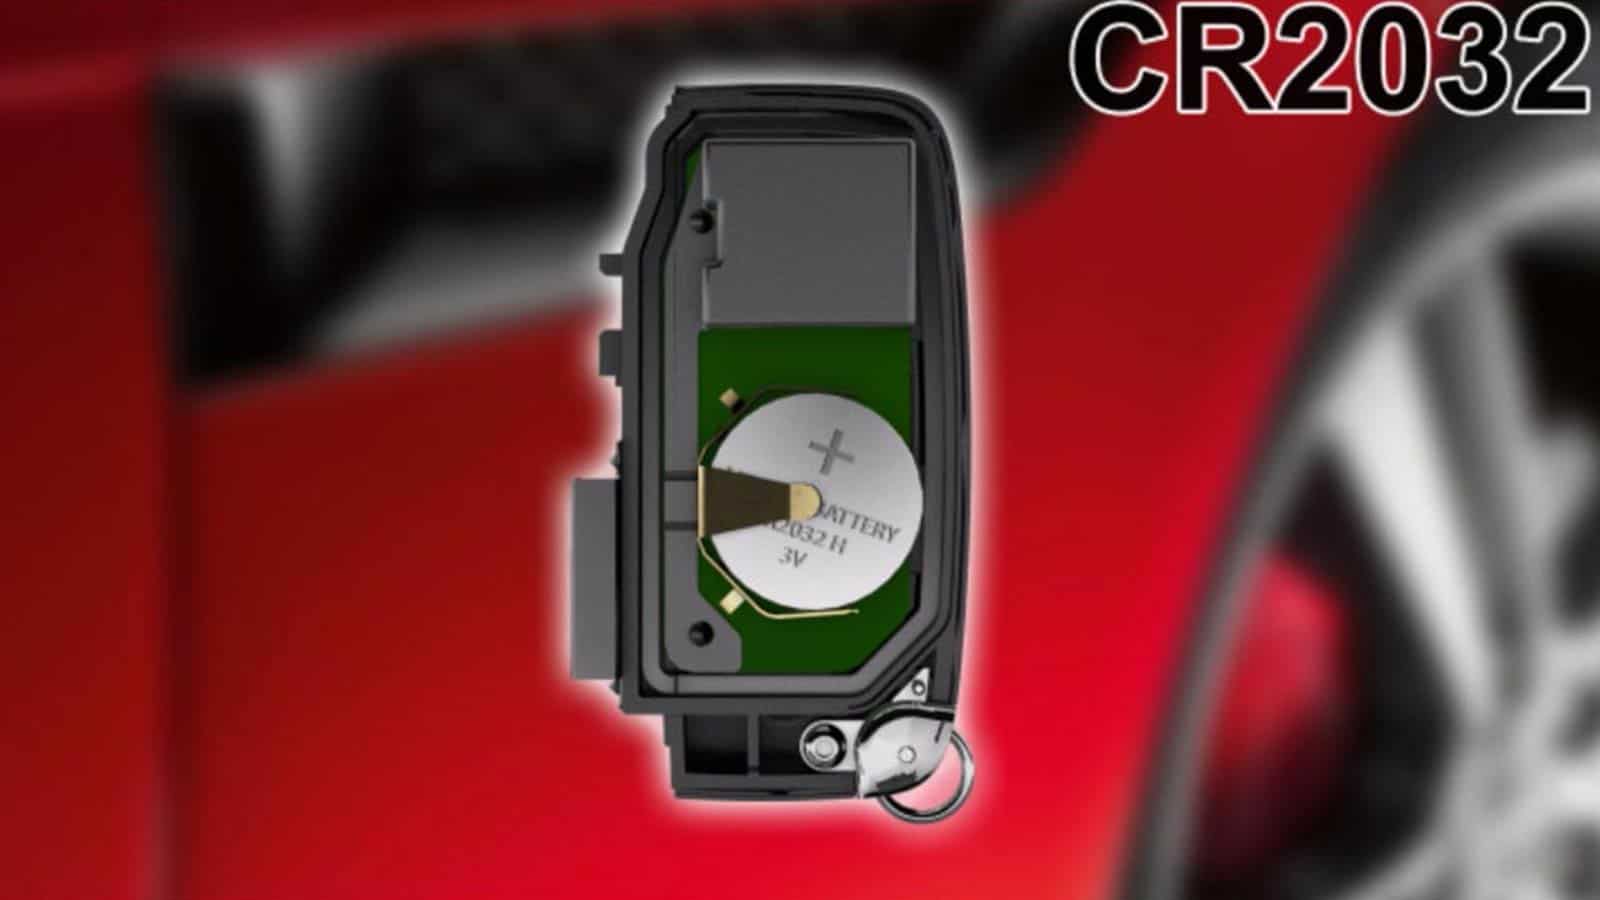 Cut-Away View Of Smart Key With Focus On The Internal Battery